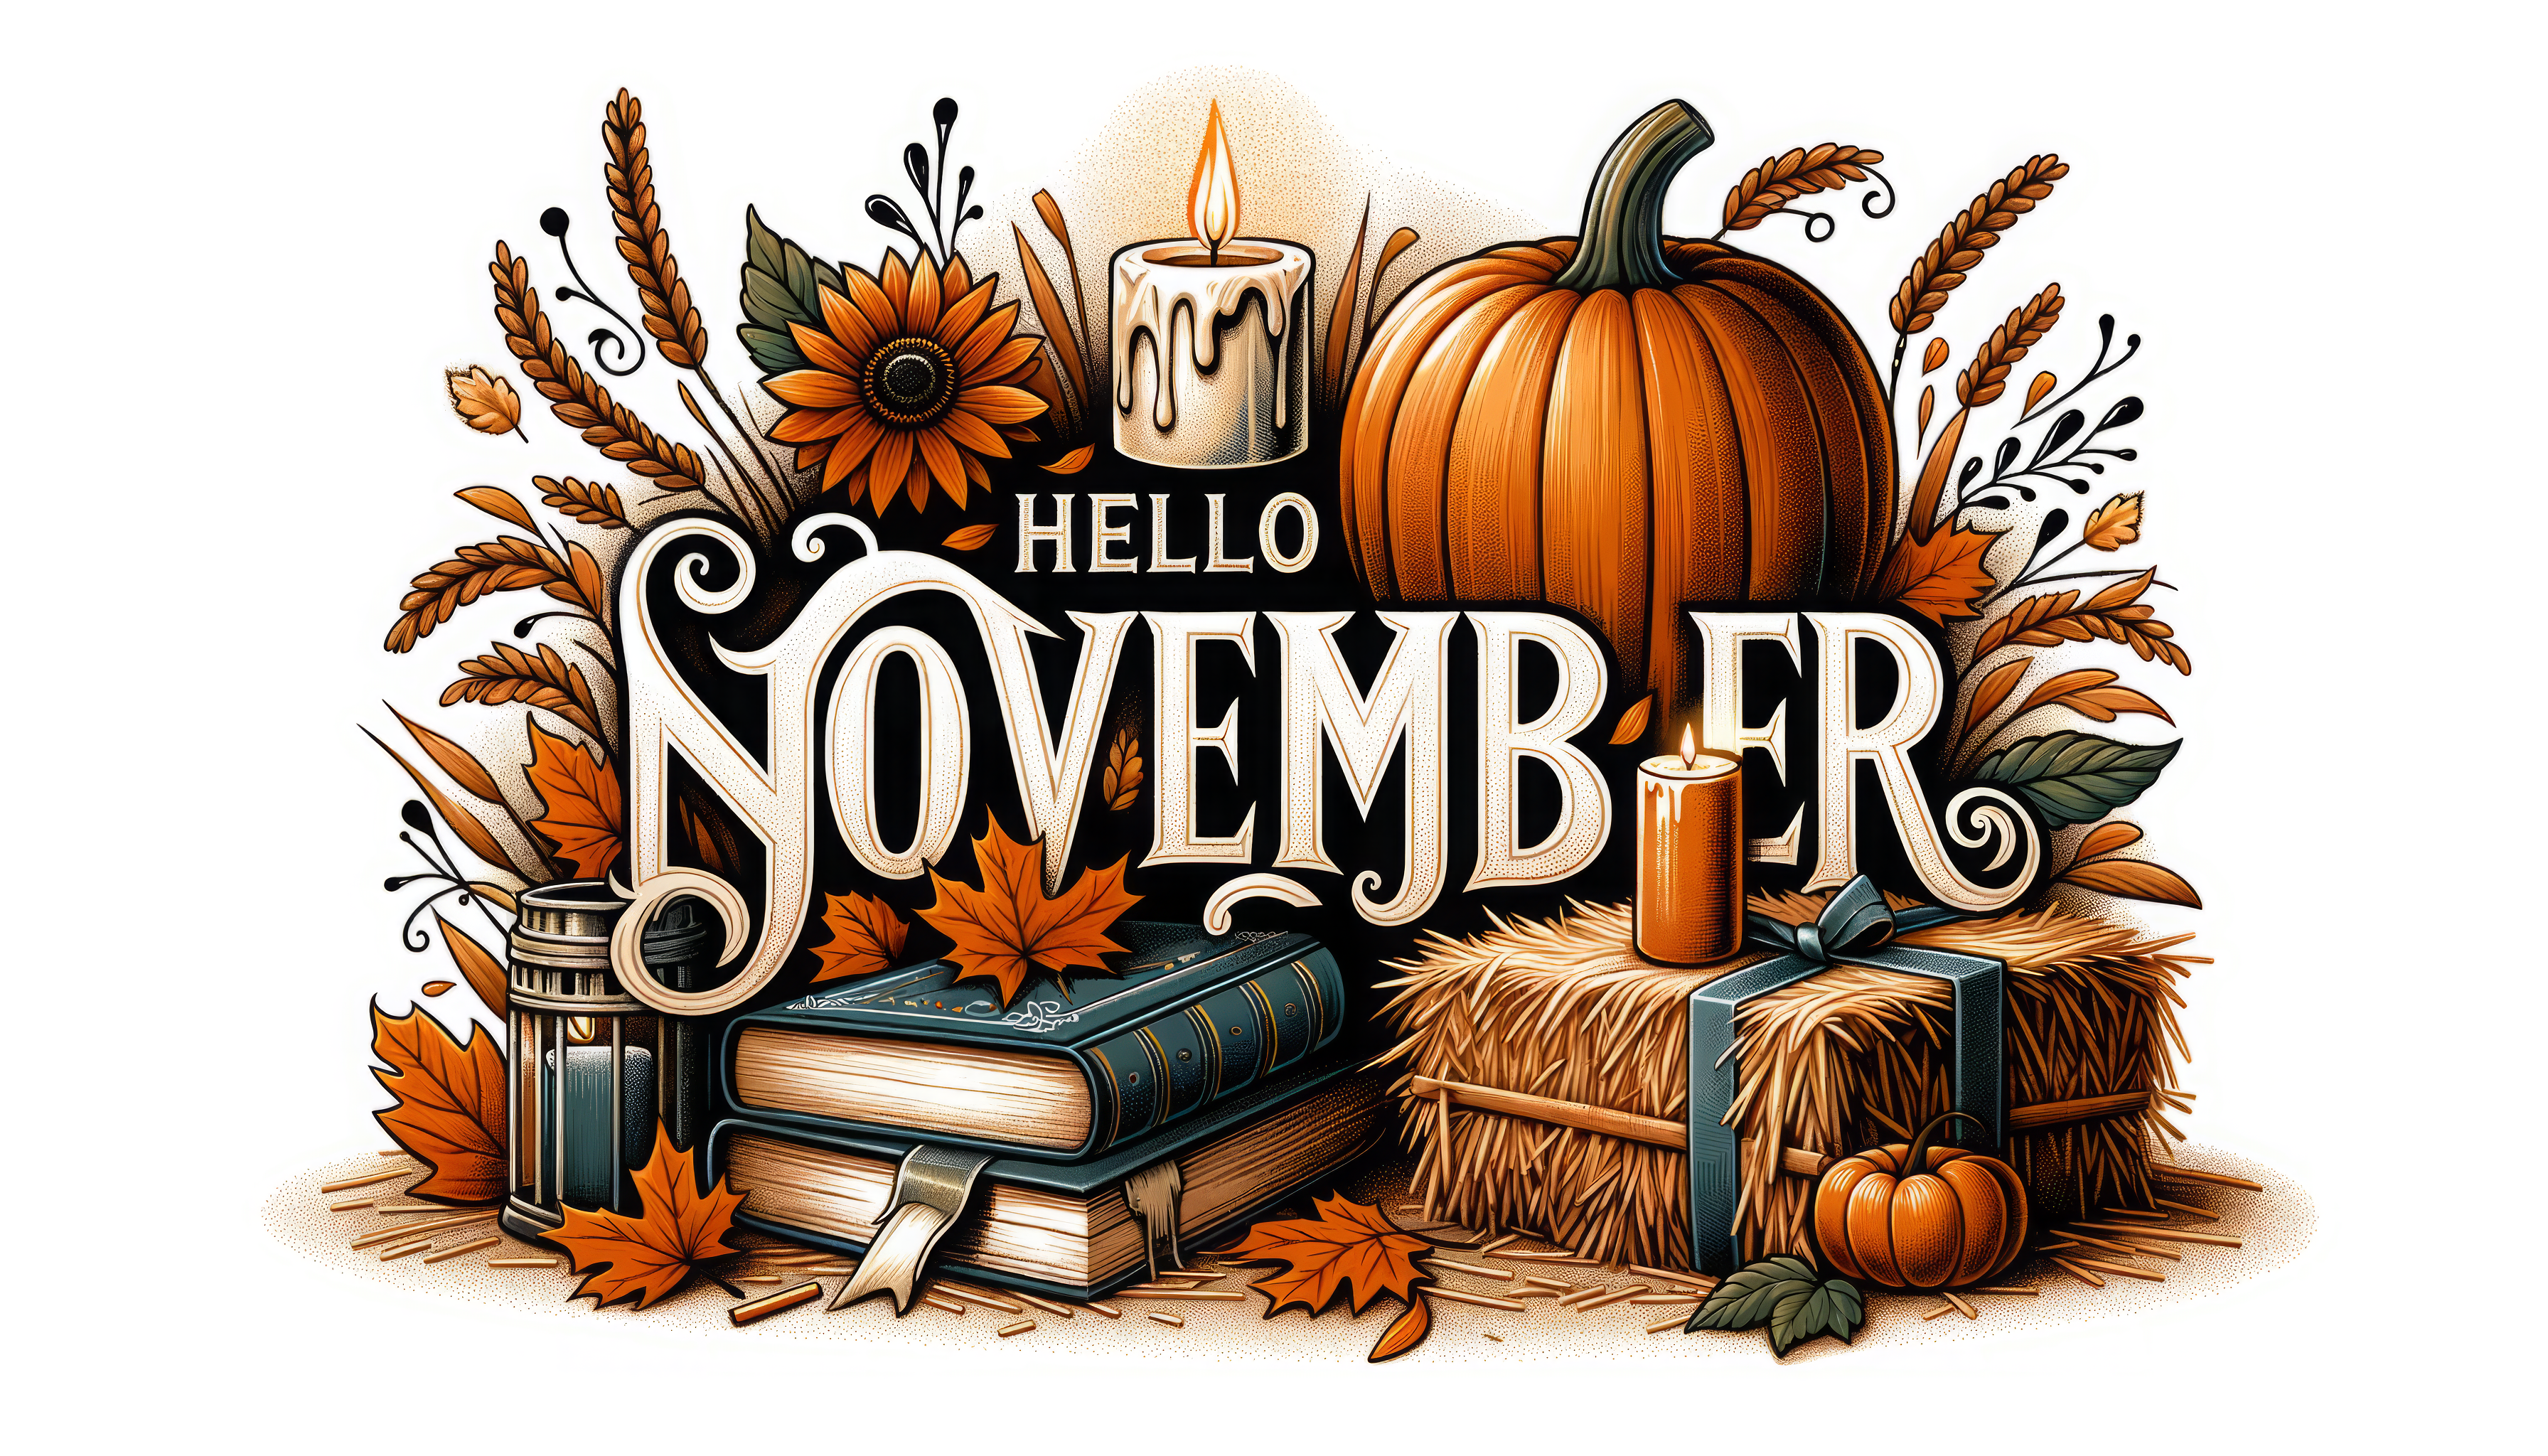 Autumn themed desktop wallpaper featuring Hello November with pumpkin, candles, and fall leaves.